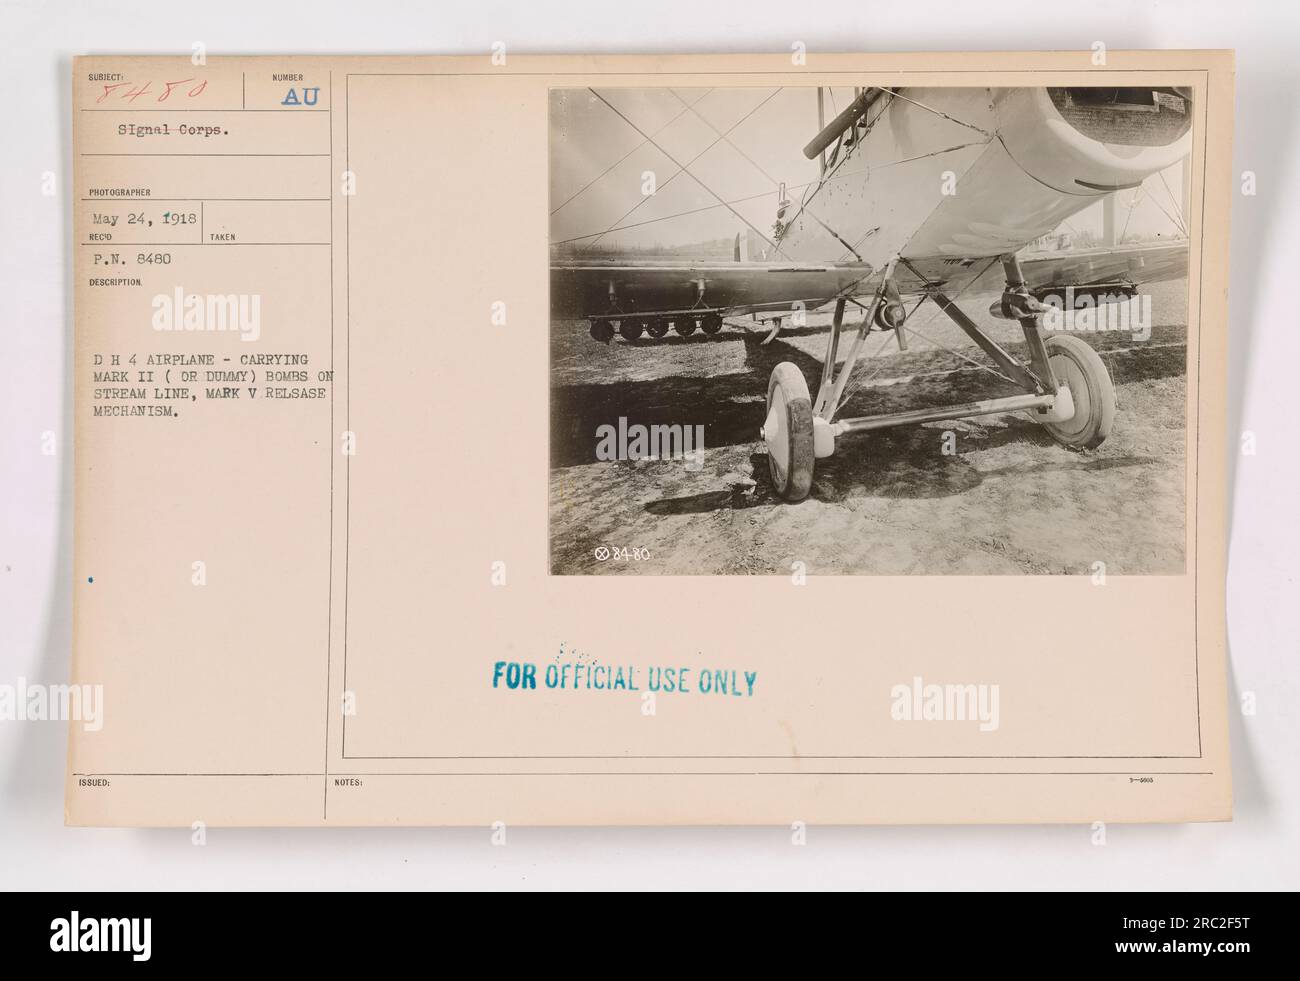 This image, labeled 111-SC-8480 and taken by the Signal Corps photographer on May 24, 1918, shows a DH 4 airplane equipped with Mark II (DR Dummy) bombs on a stream line and a Mark V release mechanism. The notes indicate that it is for official use only. Stock Photo